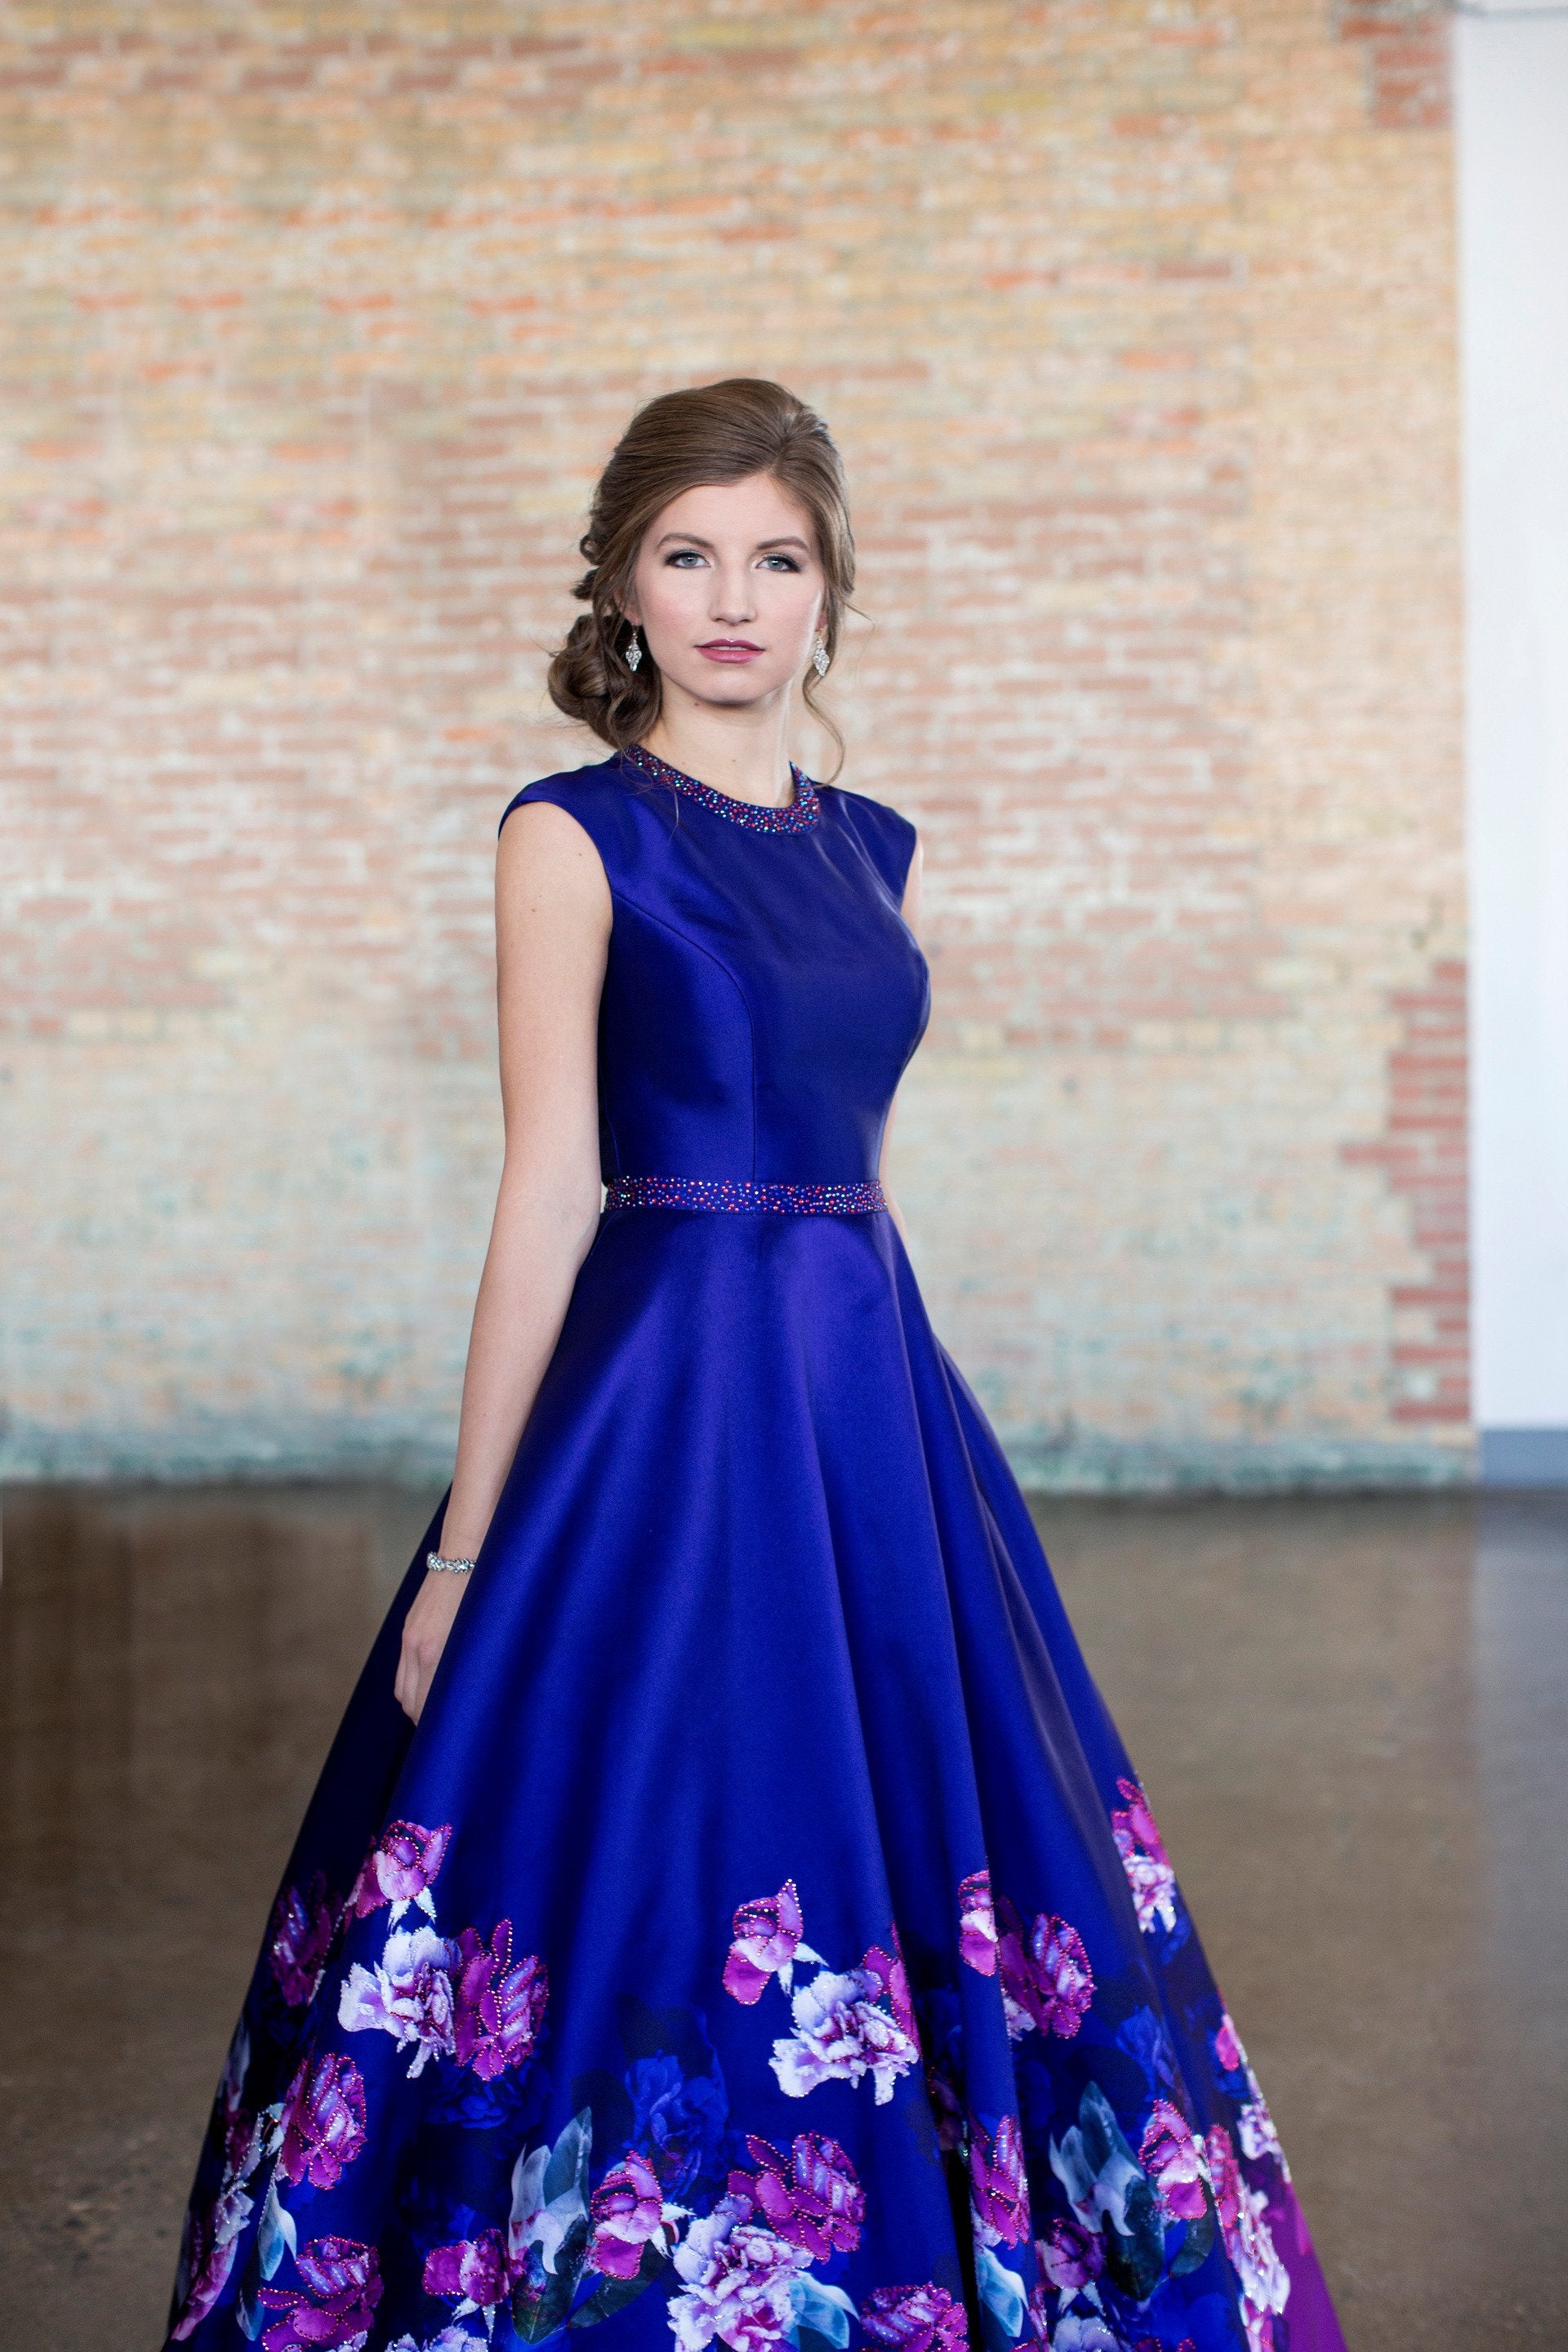 Modest Prom and Formal Dresses | A ...